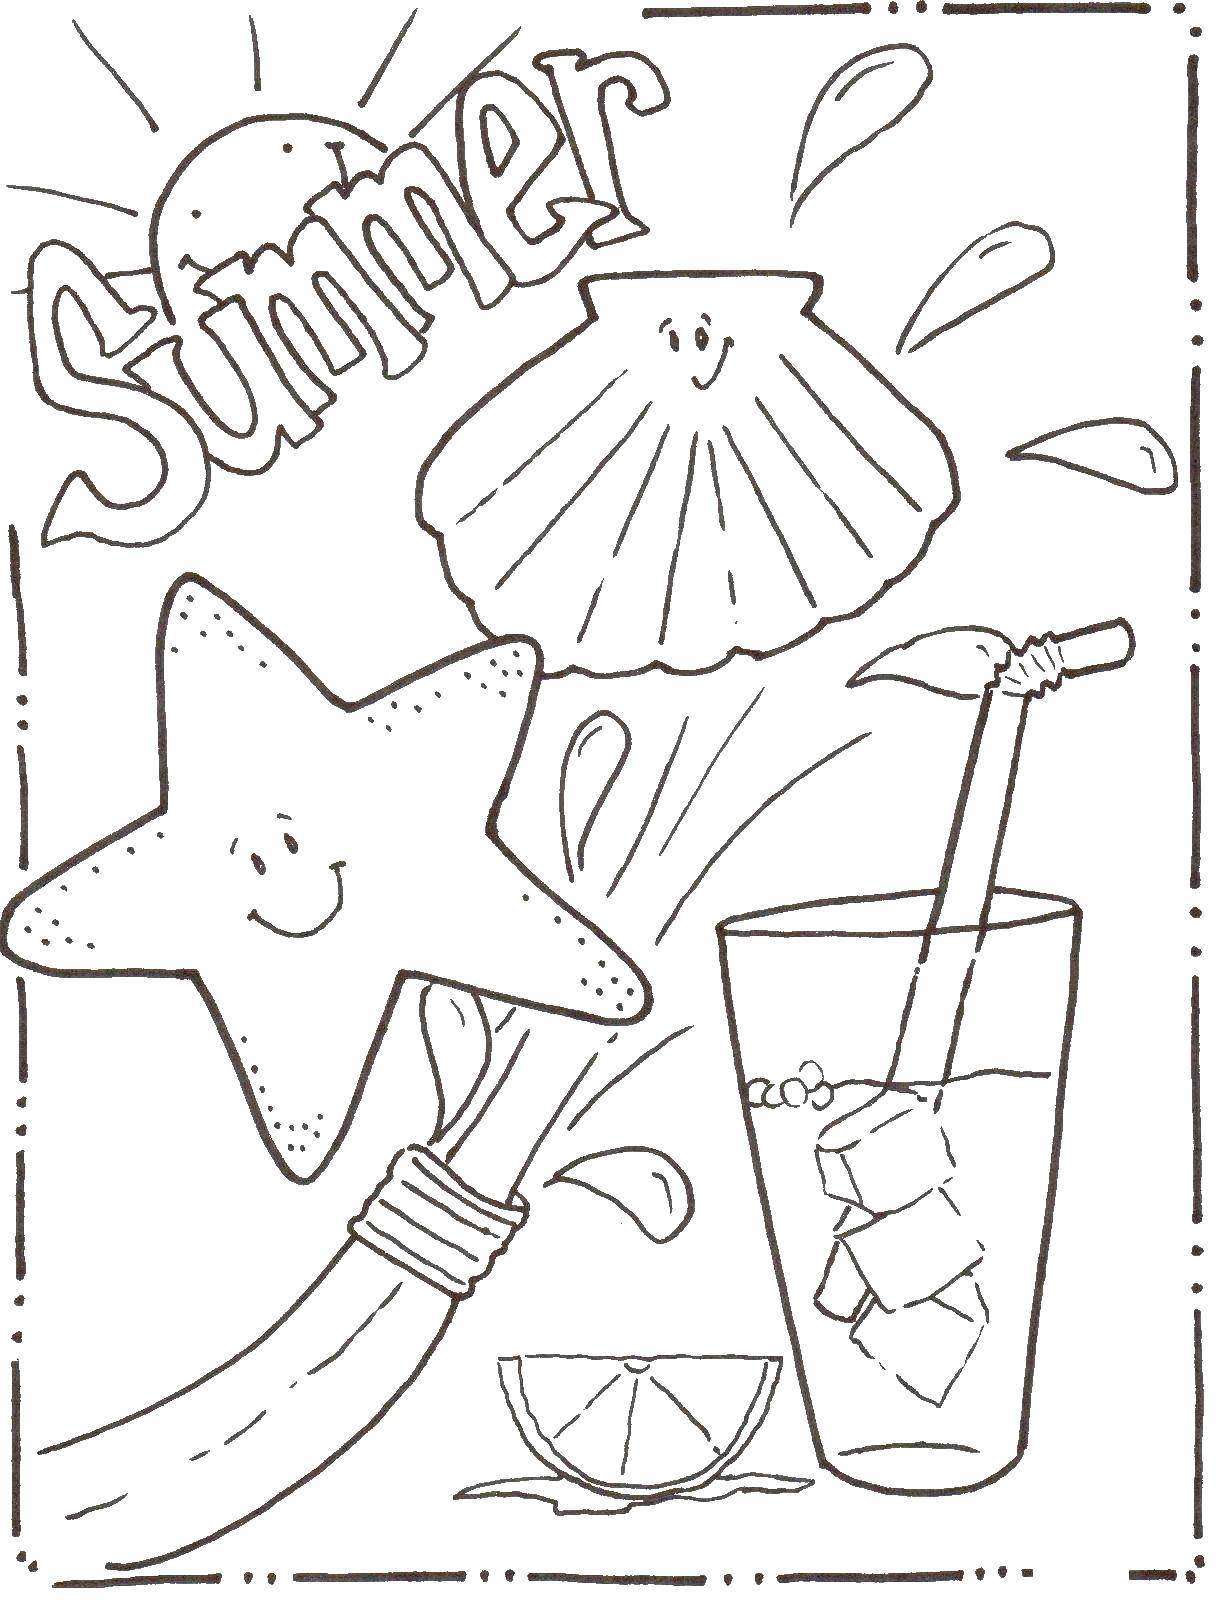 Coloring Summer. Category Summer fun. Tags:  summer, juice.